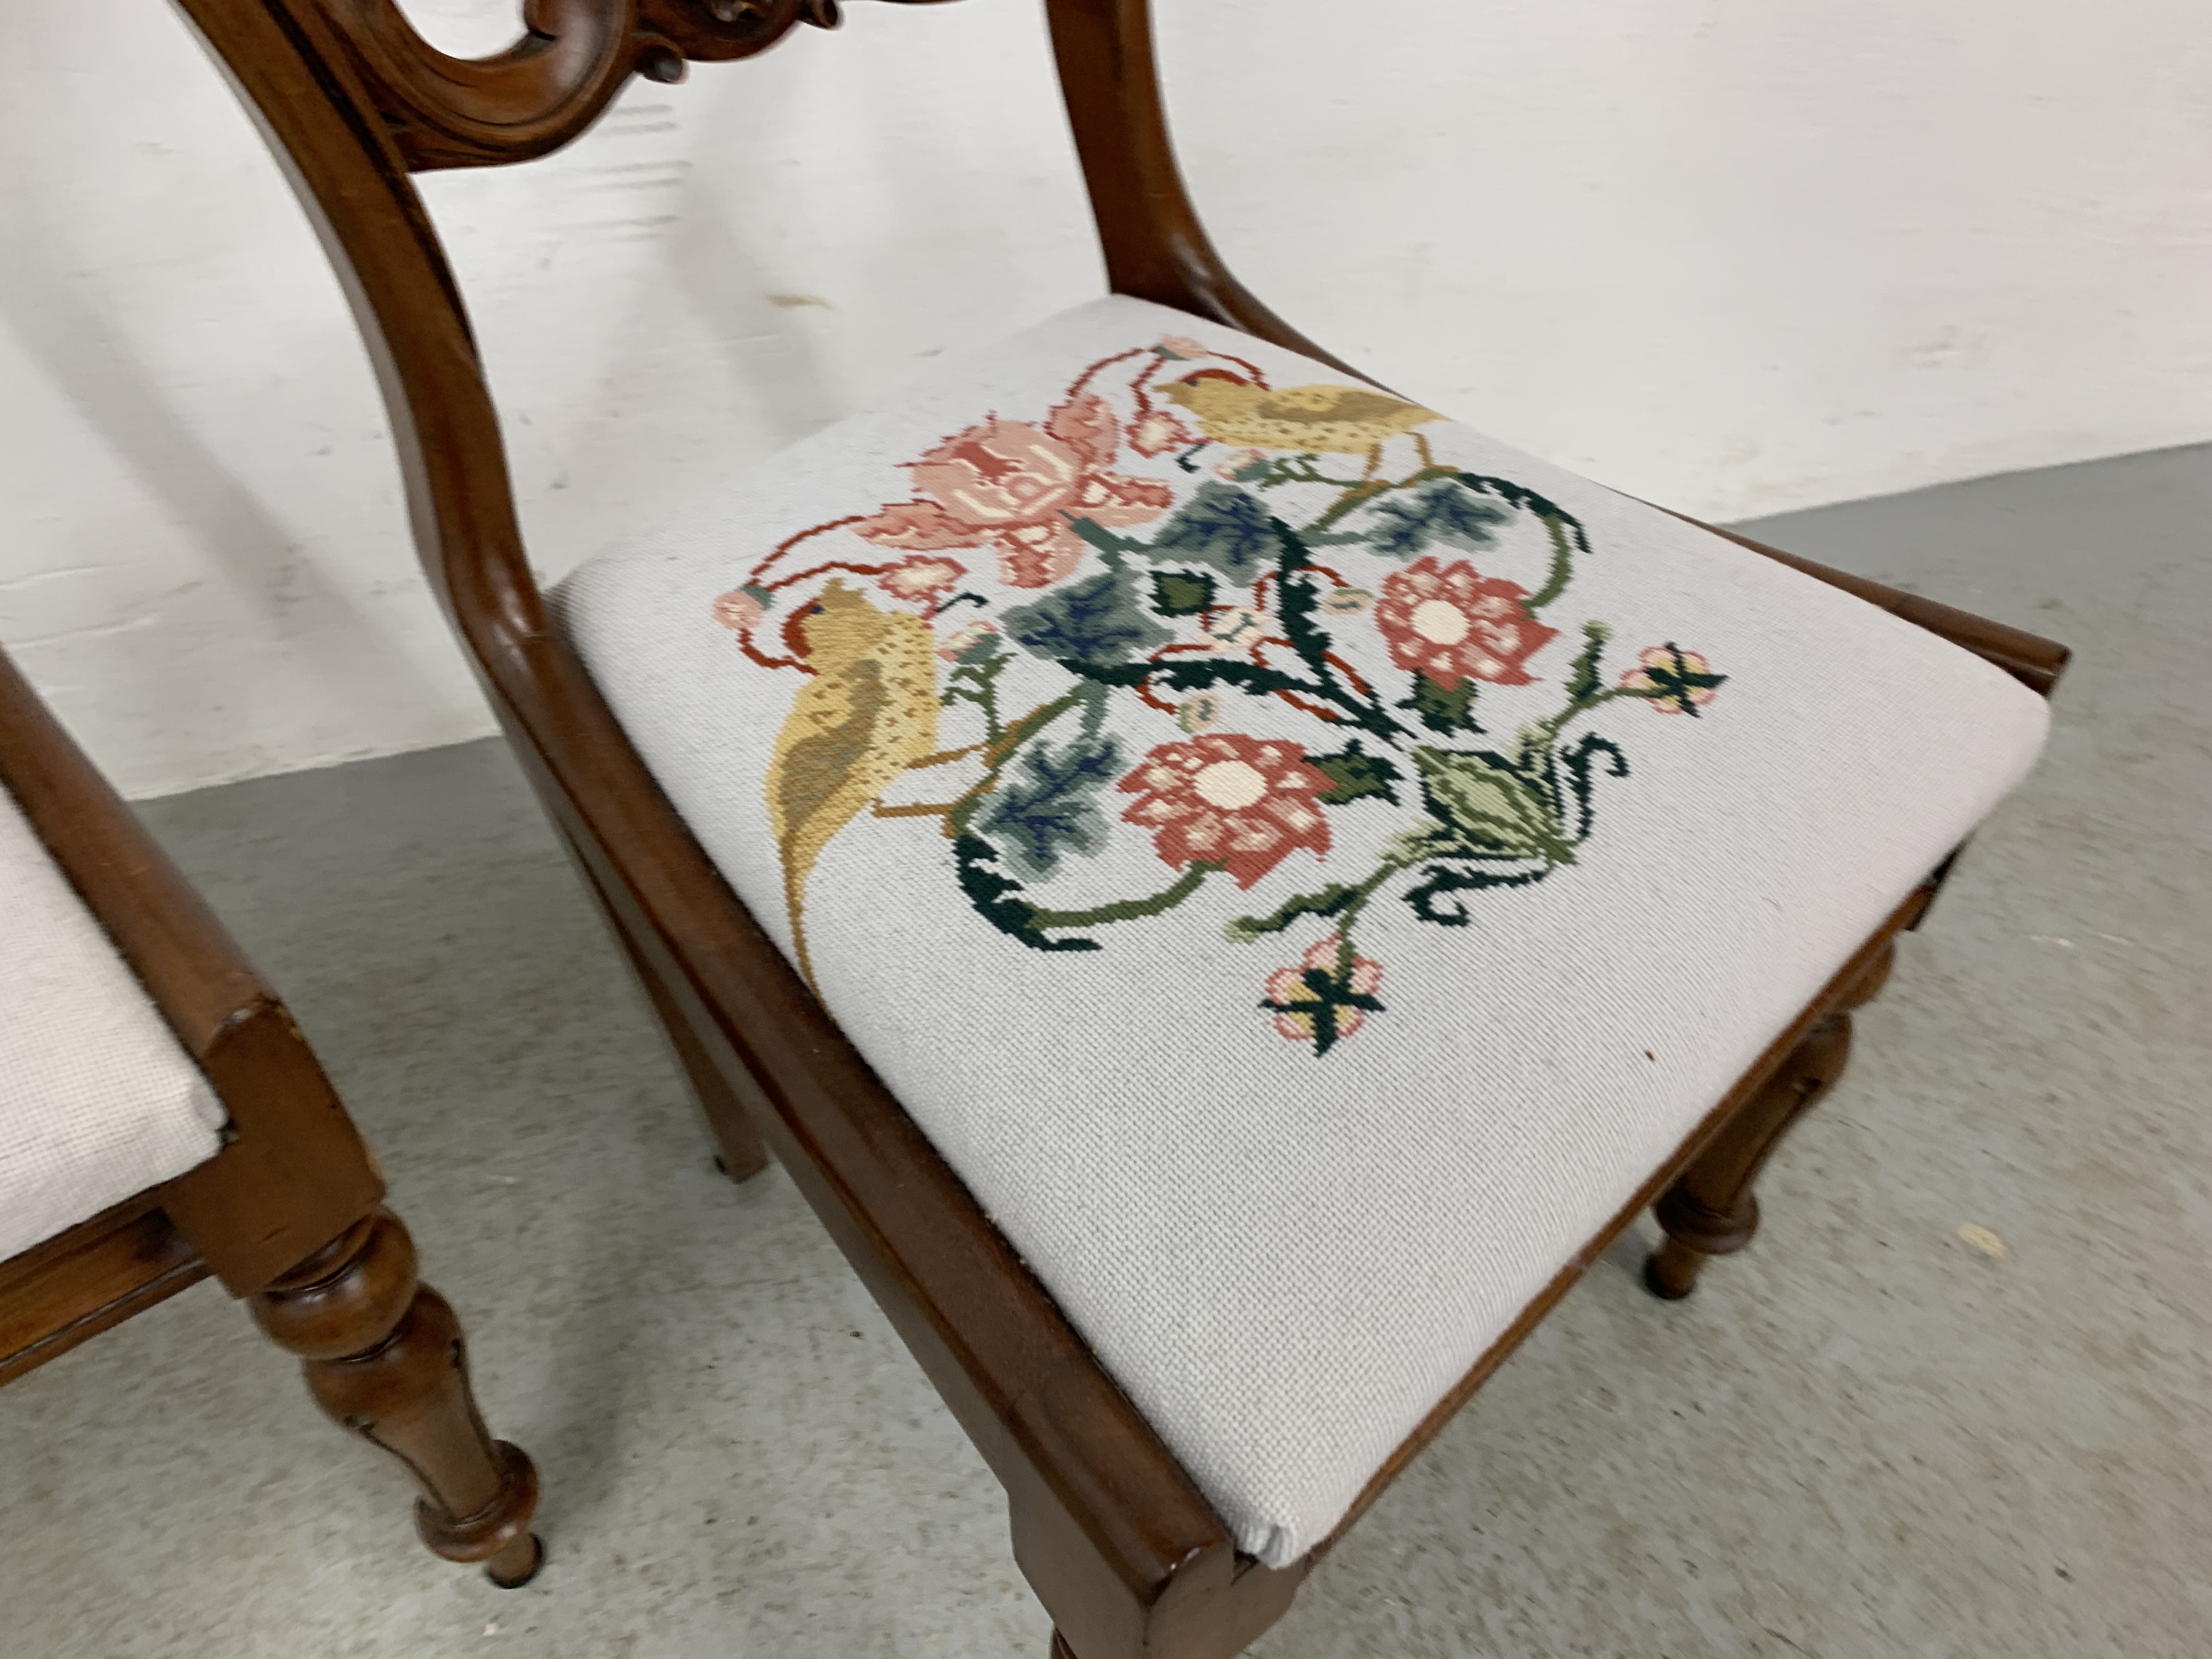 A PAIR OF VICTORIAN SIDE CHAIRS WITH HAND EMBROIDERED DROP IN SEATS. - Image 6 of 9